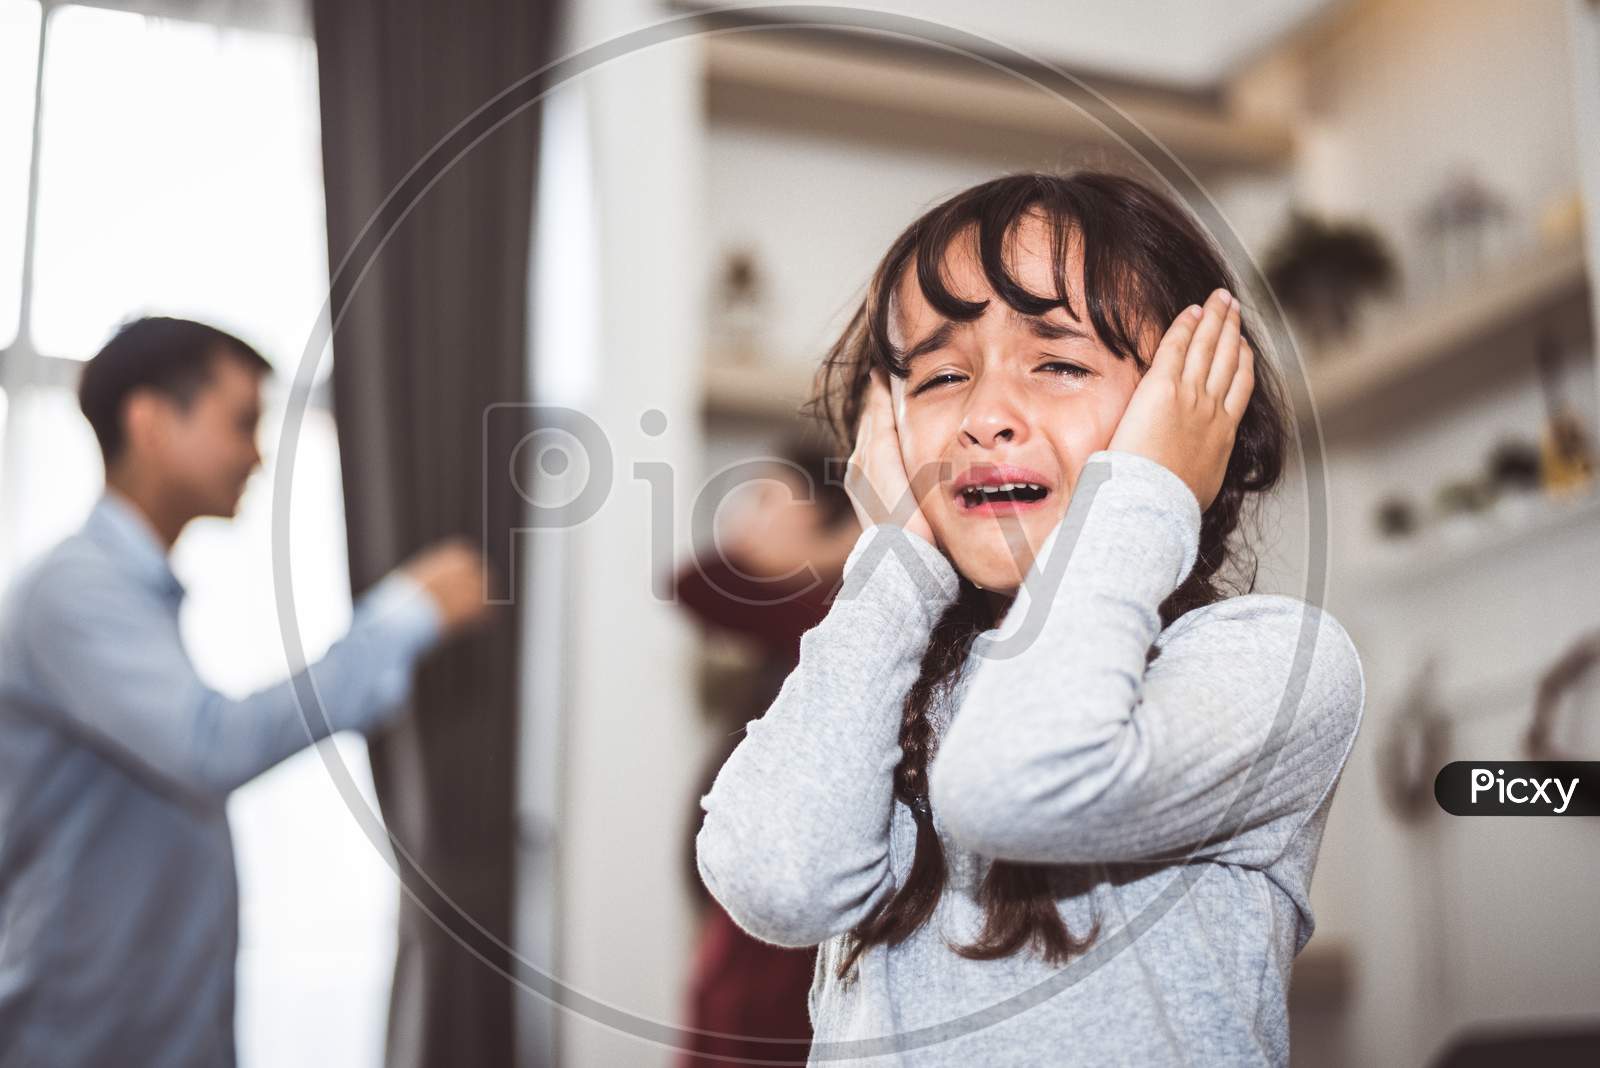 Little Girl Crying Because Of Her Parents Quarreling. Girl Abused With Mother And Father Shouting And Conflict Angry Background In Home. Family Dramatic Scene, Family Social Issues Problem Concept.